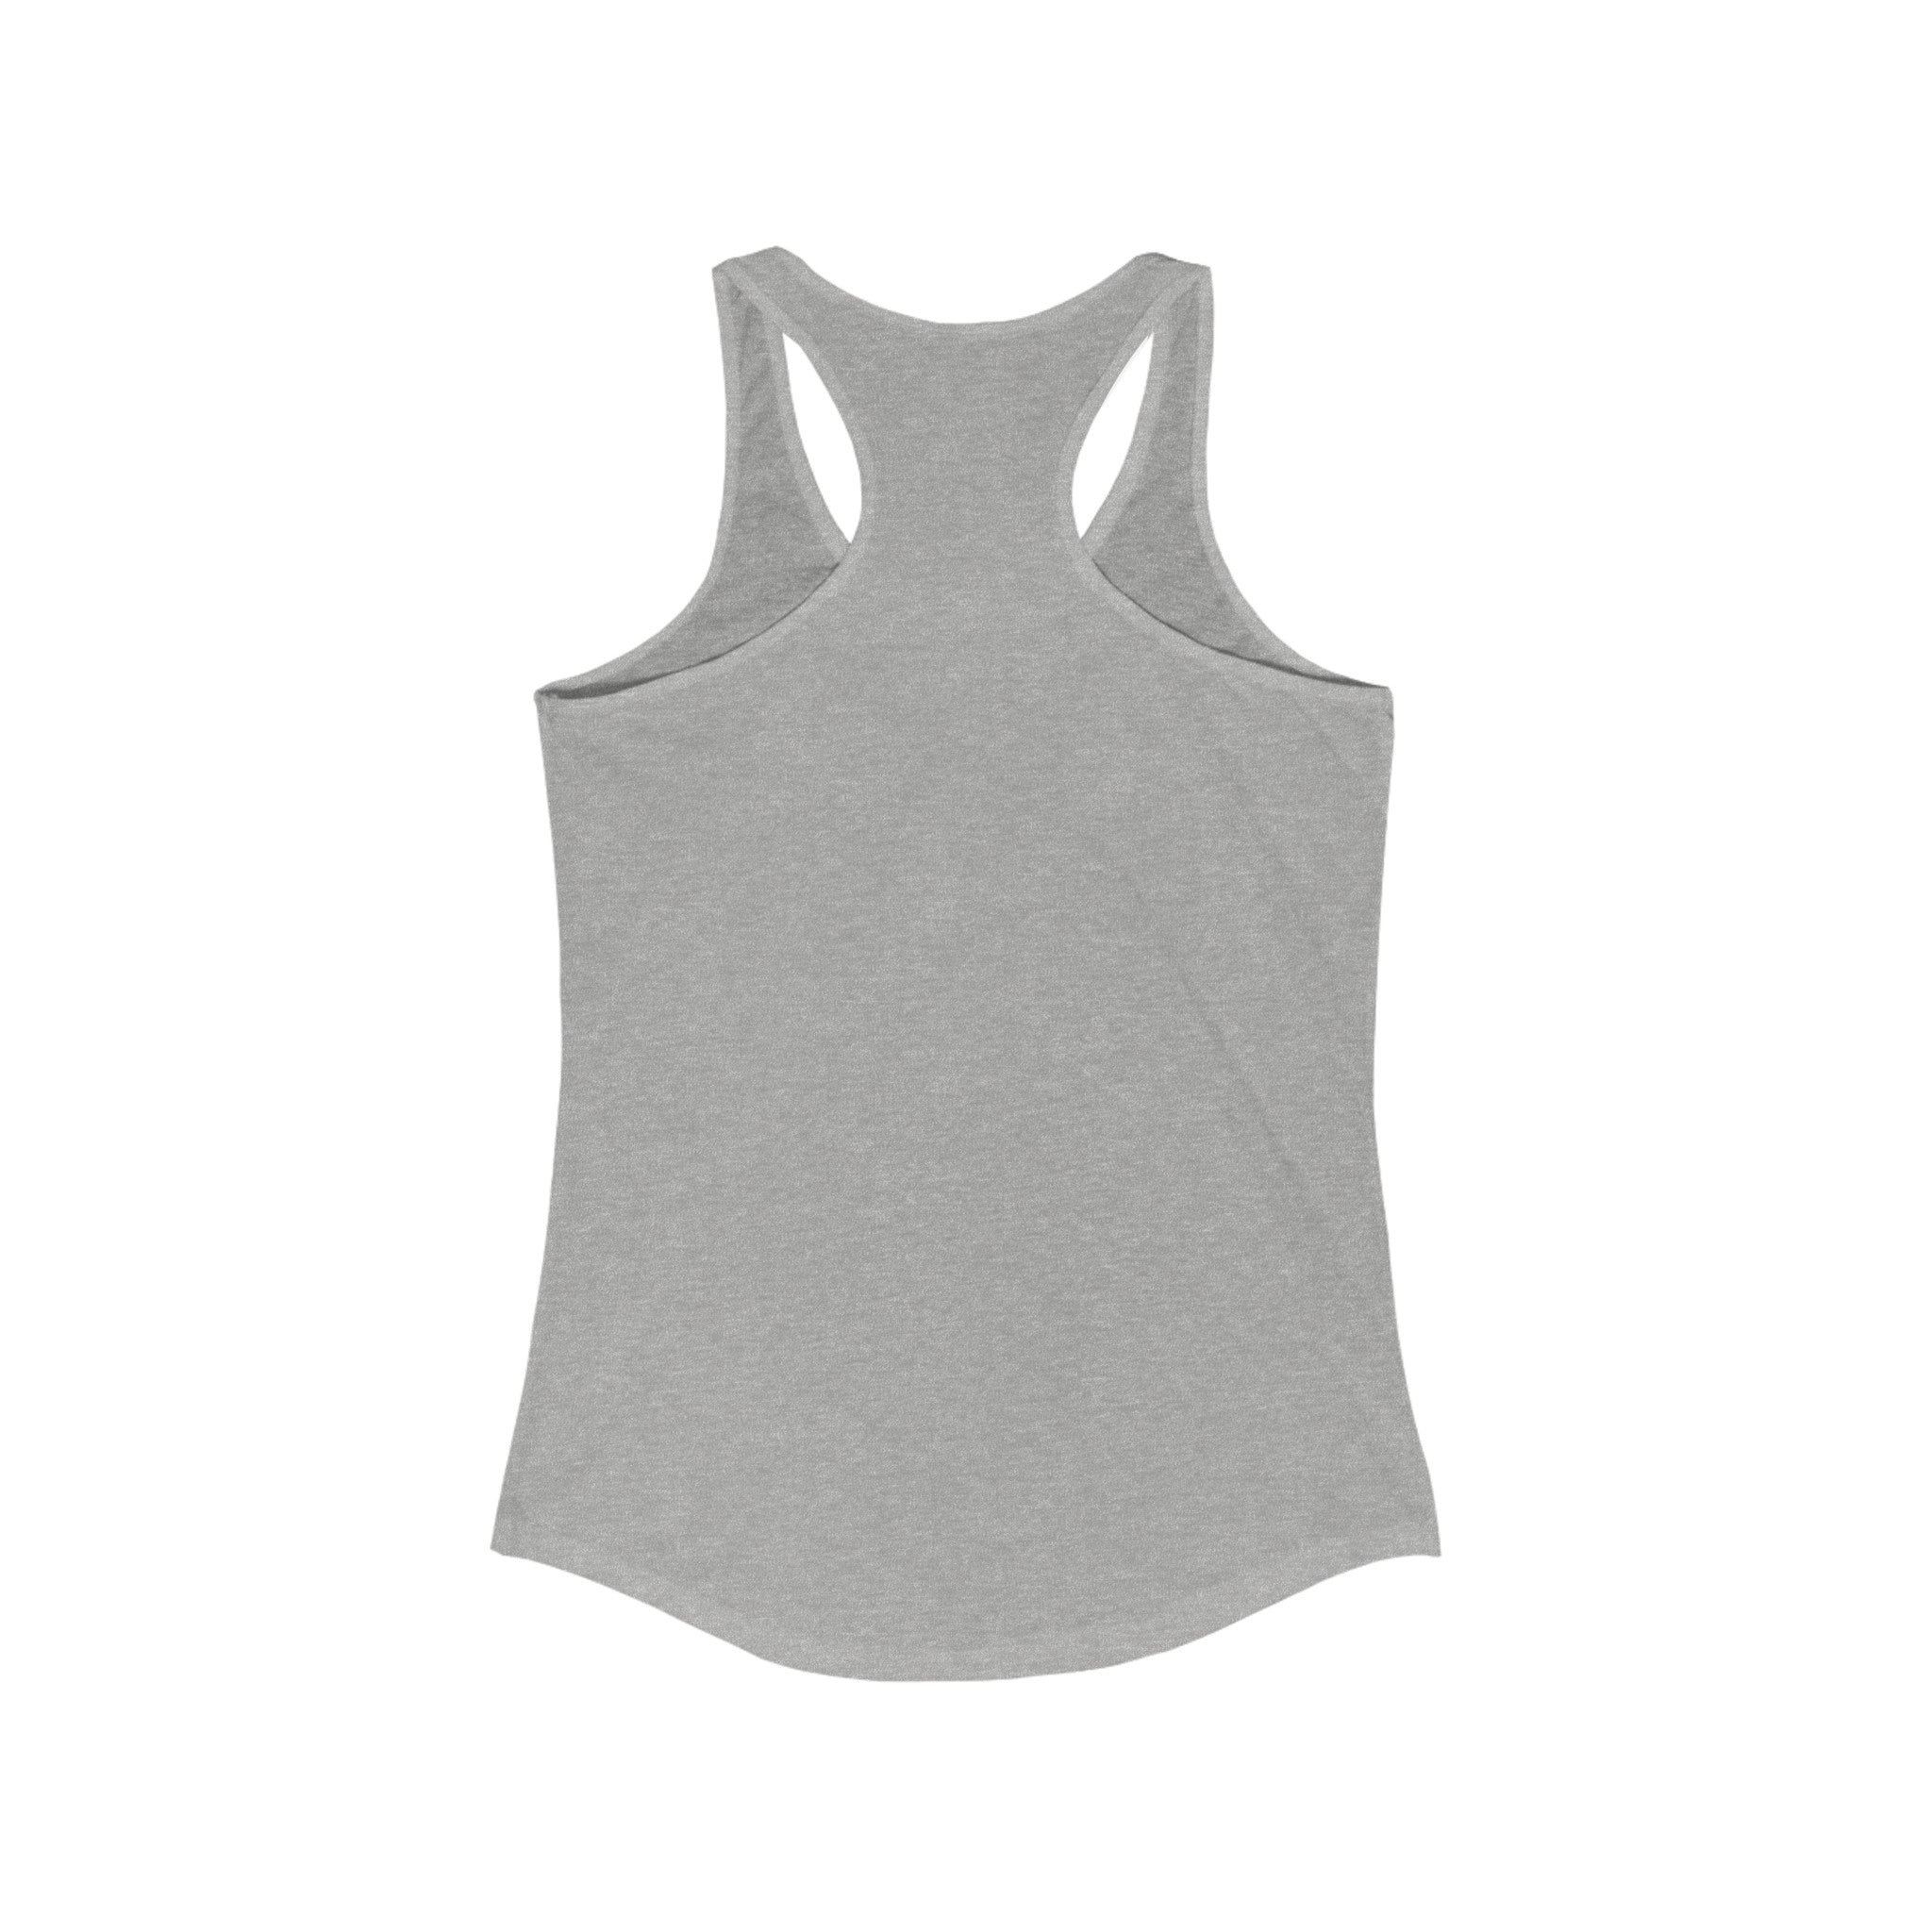 8770296152346159299_2048.jpg - Keep on Detailing v2 Women's Tank - Undrdog Surface Products